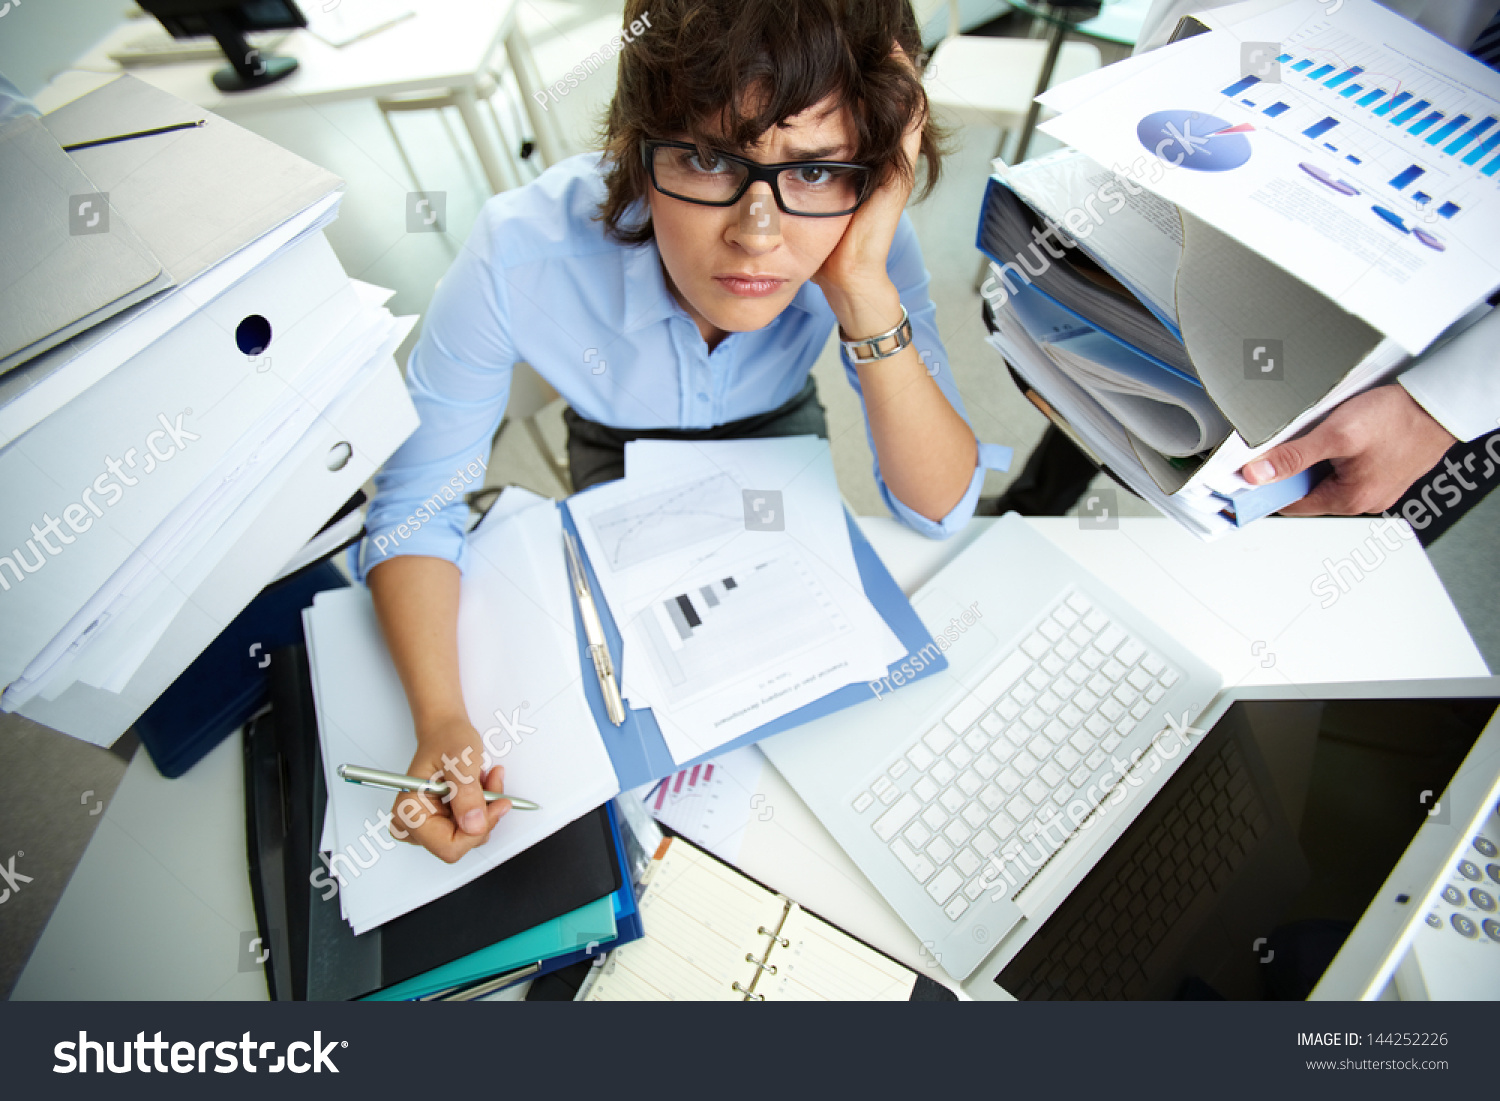 Perplexed accountant doing financial reports being surrounded by huge piles of documents #144252226